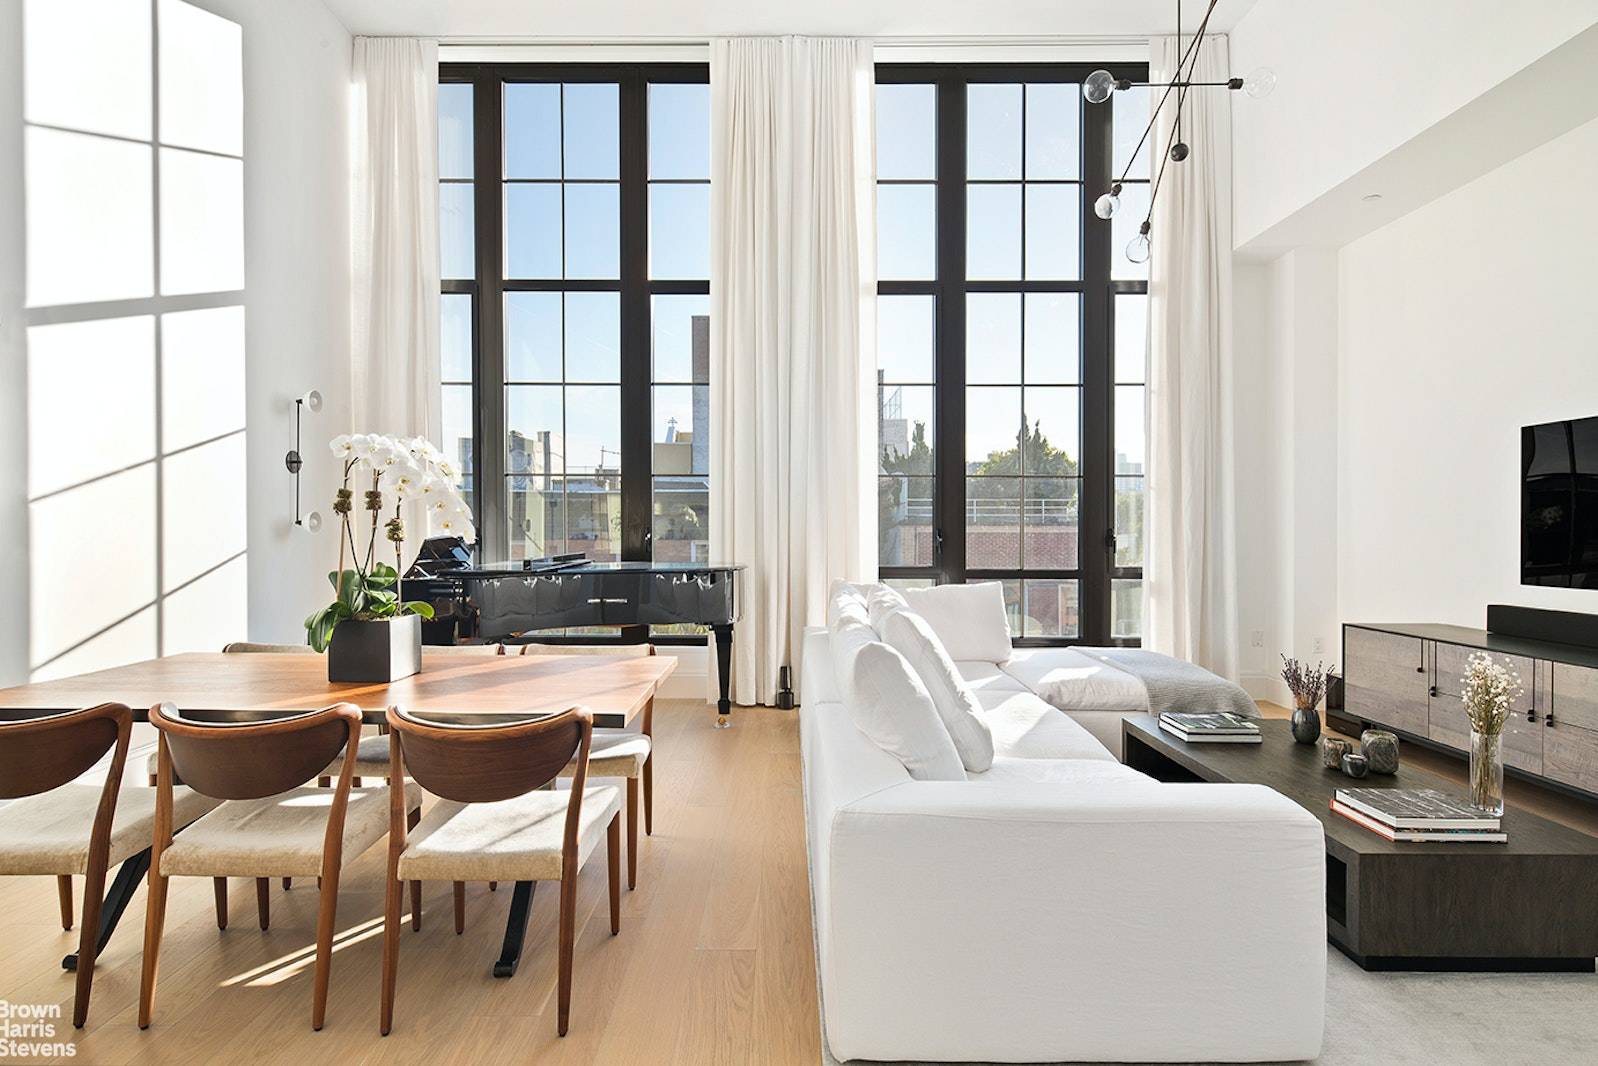 SHORT TERM AVAILABLE FULLY FURNISHEDPenthouse F at Steiner East Village is a luxurious and spectacular 1782 square foot 3 bedroom, 2.